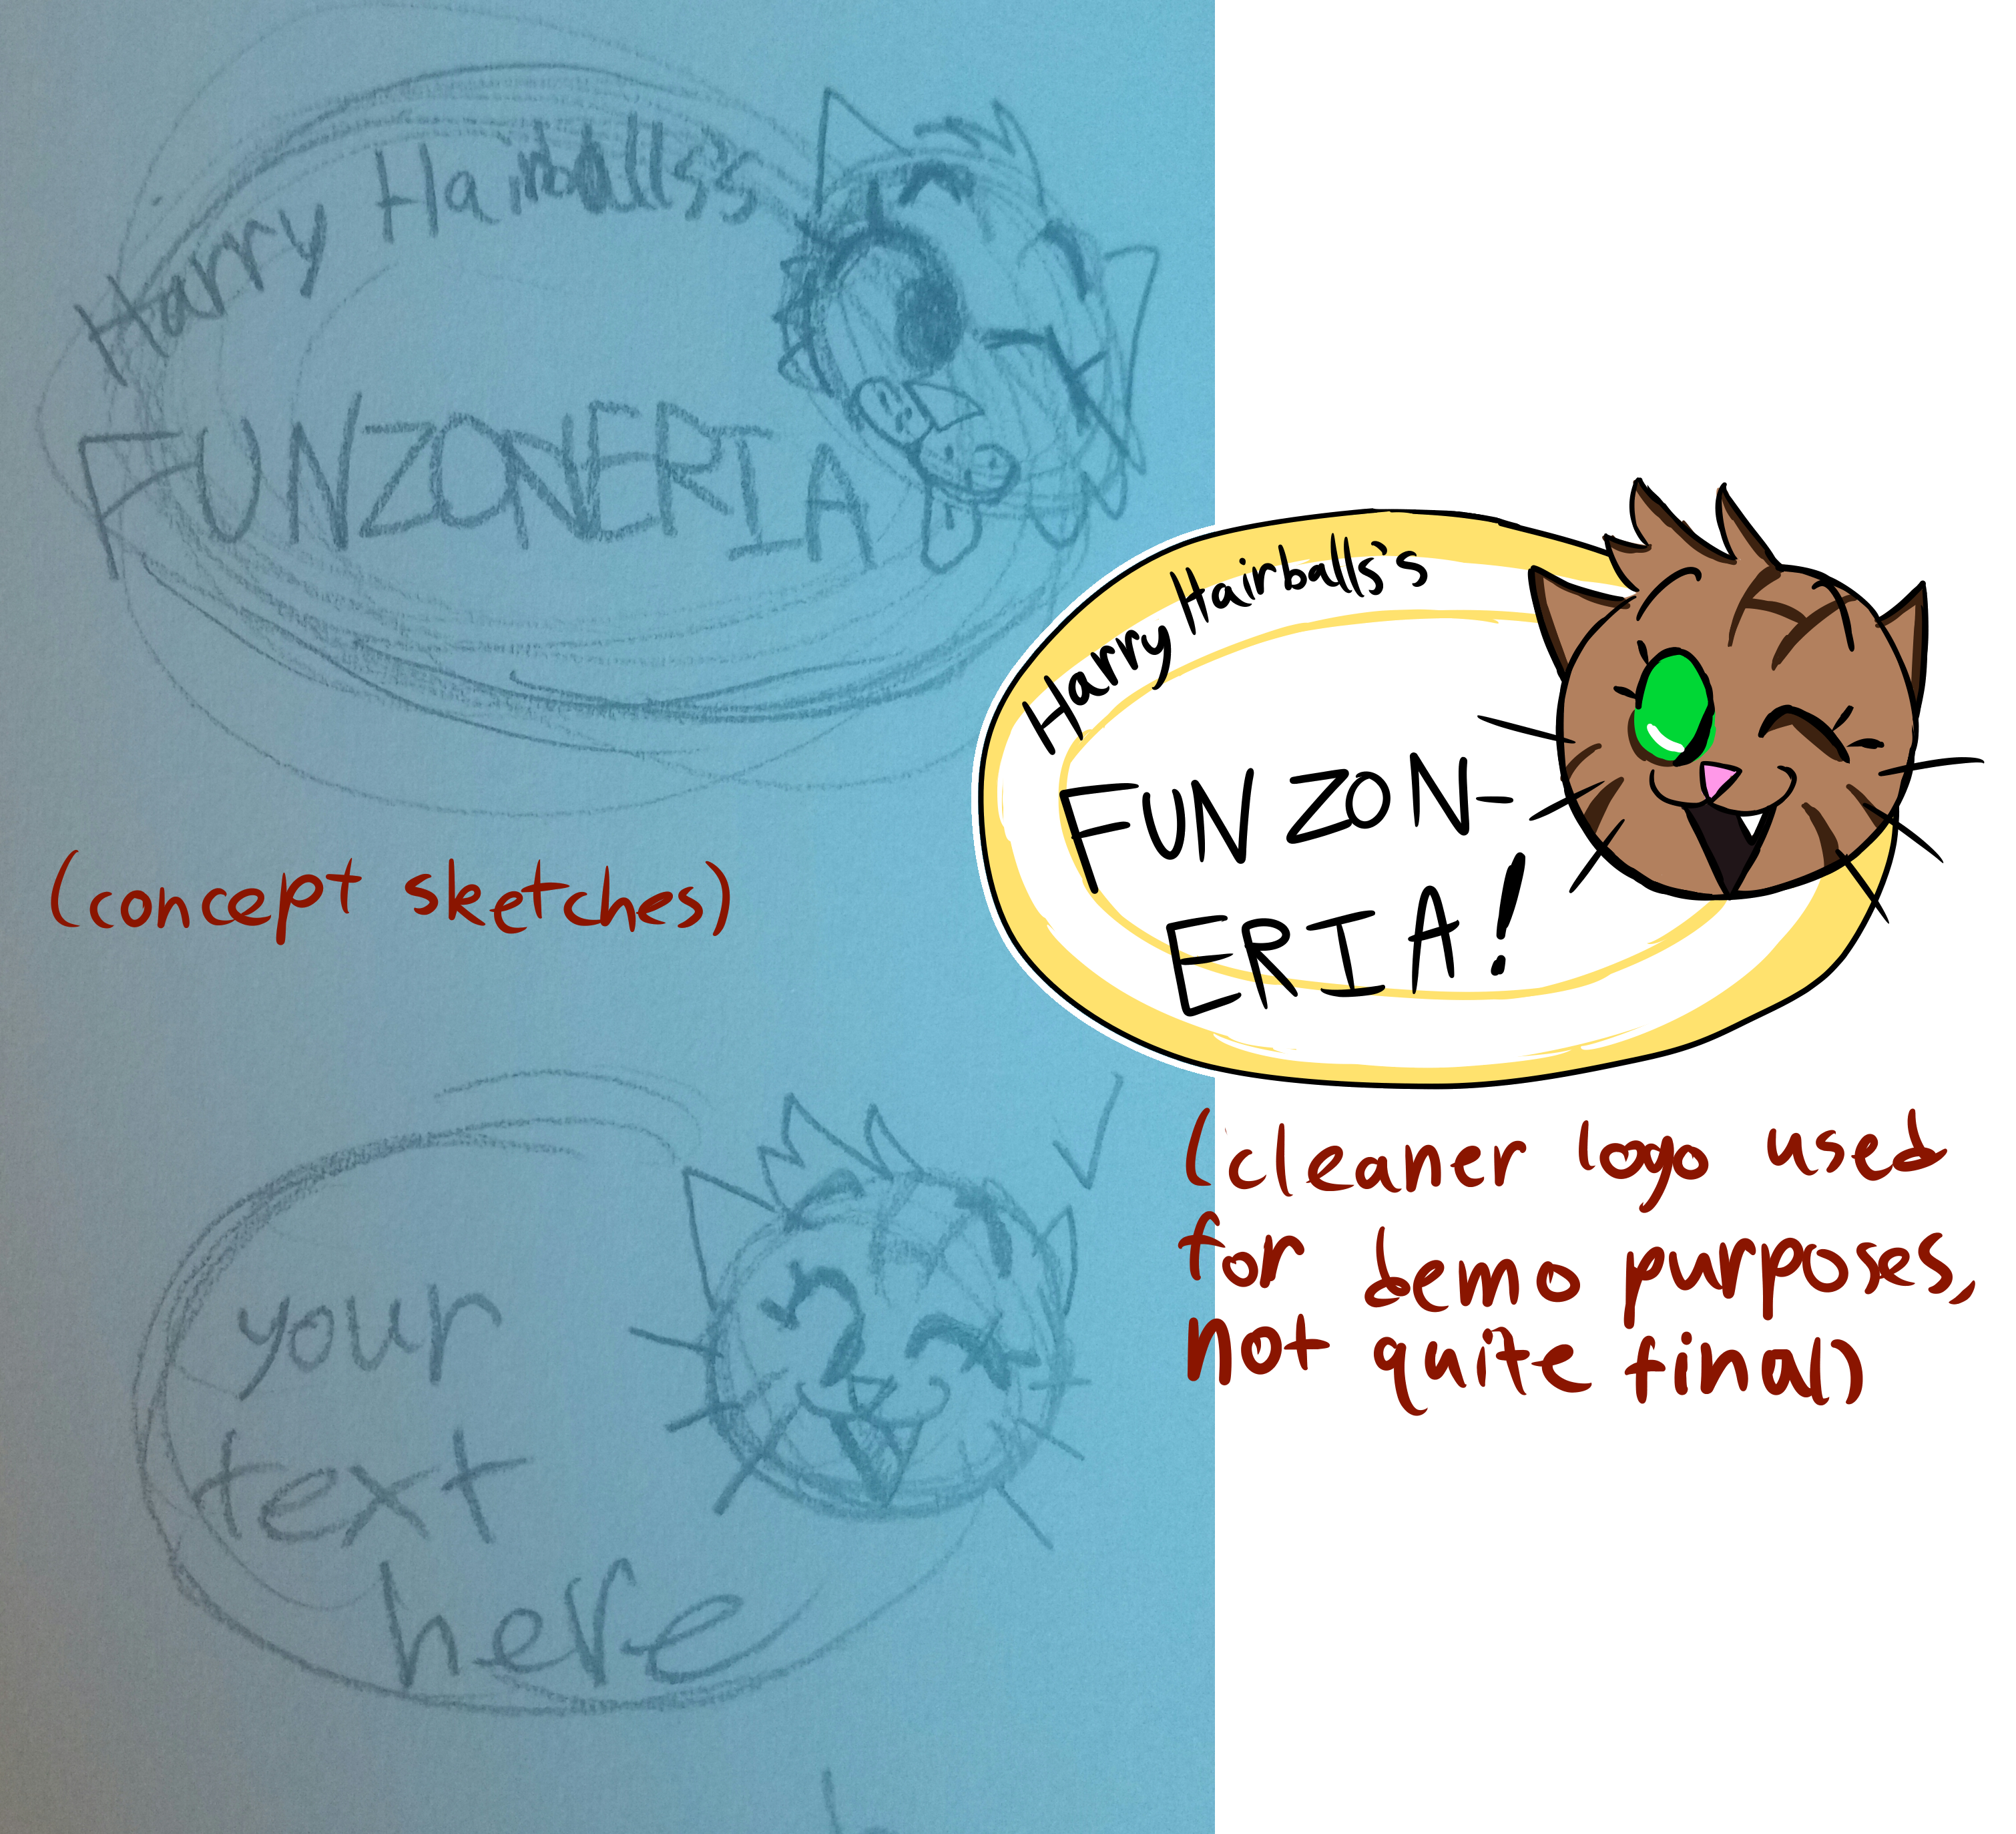 Two rough sketches of a logo for a fictional establishment, and one cleaner, colored version.  The first rough sketch features a round cat head with fluffy fur, tufts of hair coming off his forehead, round simple eyes, and a Garfield-esque mouth, winking and sticking his tongue out with a smile.  It's next to the words 'Harry Hairballs's Funzoneria' written inside an oval.  The second rough sketch has a much more simplified, sleeker version of the first cat, akin to more modern cartoons, winking and smiling with his mouth wide open, and the text simply reads 'your text here'.  There is a check mark next to the second sketch.  Written in parentheses between these two sketches are the words 'concept sketches'.  The colored logo is a more cleaned up version of the second sketch.  The cat is now tan with some brown stripes, a capital H in the middle of the forehead similar to the M-like mark often seen on the foreheads of tabby cats, and his eyes are now colored green.  The text again reads 'Harry Hairballs's Funzoneria', but now the word 'Funzoneria' is awkwardly broken into two lines with a hyphen after 'Funzon'.  The amount of free space gives the impression this was intentional.  The oval behind everything is white with a thick yellow band around the edge, and a thinner yellow oval drawn a little ways within the white, like a dip in certain plates.  In parentheses below this version is written 'cleaner logo used for demo purposes, not quite final'.